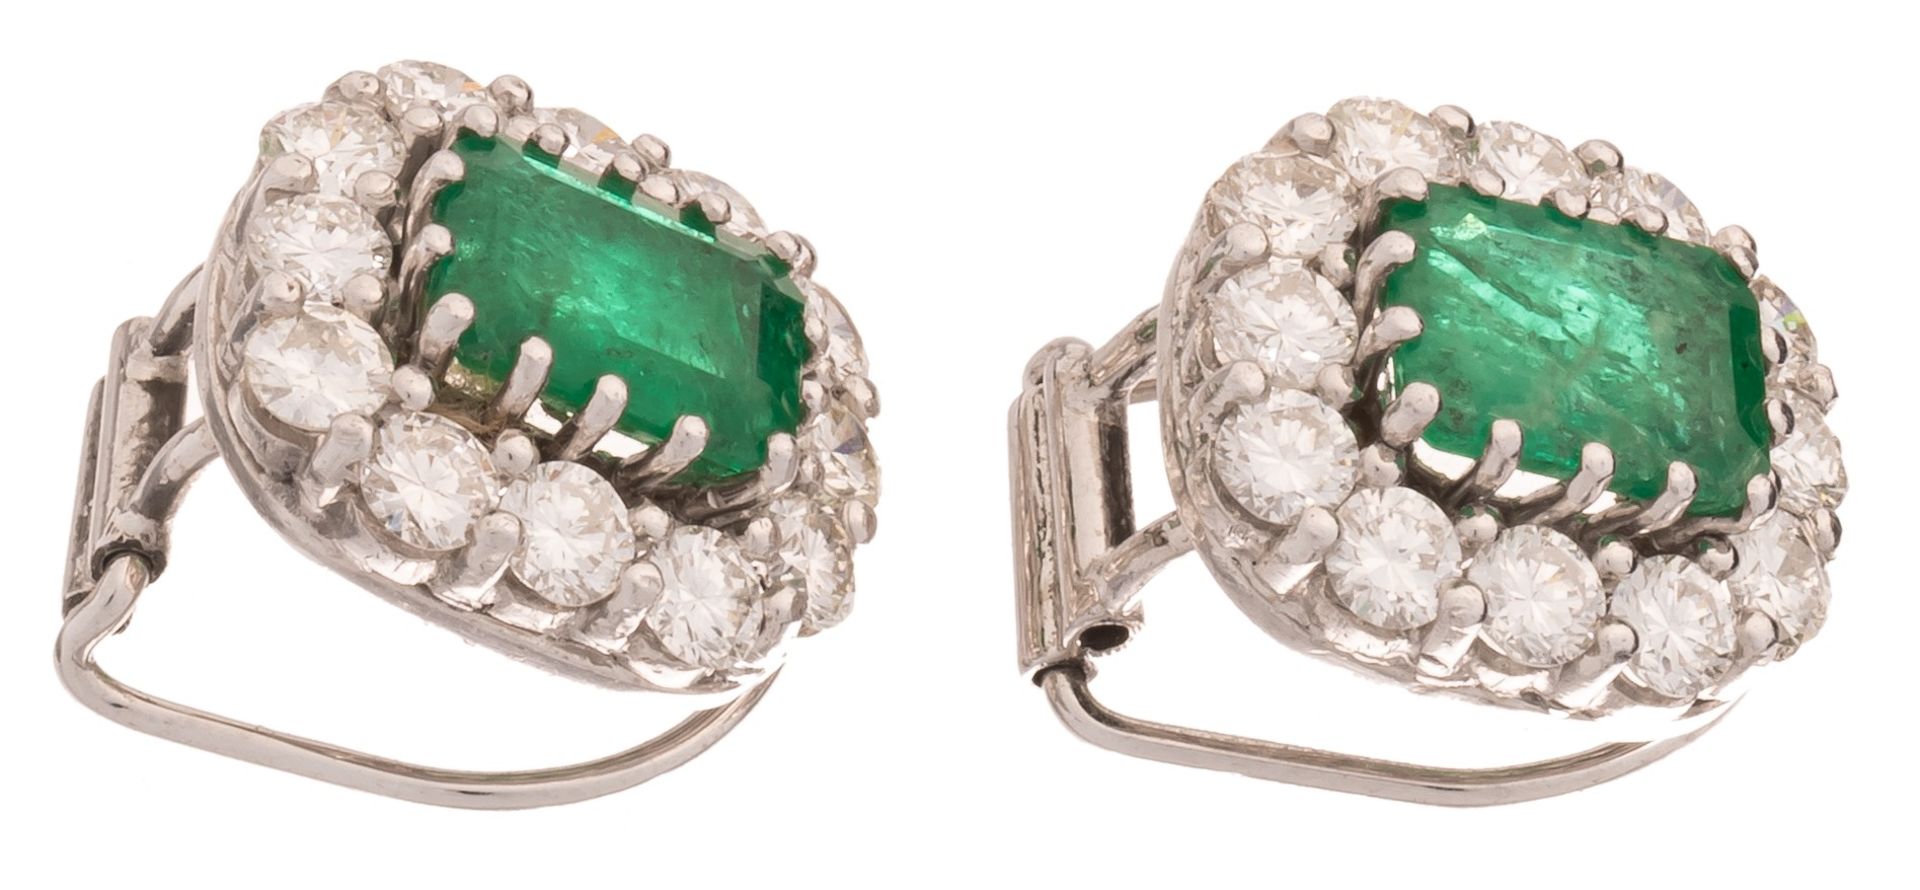 A pair of earrings in 18ct white gold, set with brilliant-cut diamonds and emeralds, 8,6 g - Image 4 of 4